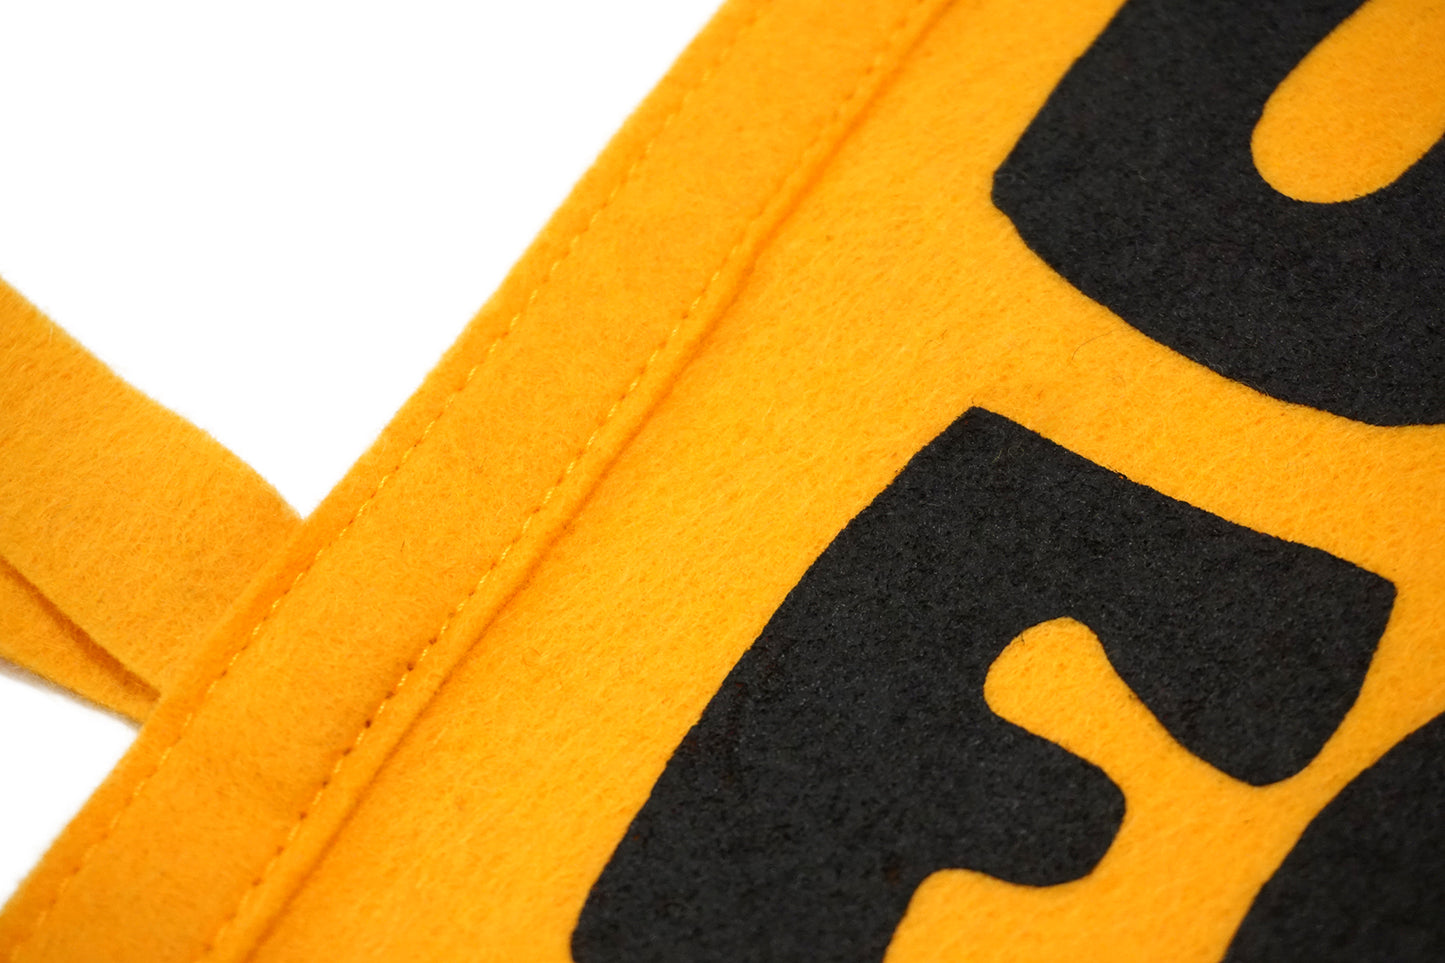 Lost & Found & Lost Again Pennant • Chrome Yellow x Office of Brothers x Oxford Pennant Original